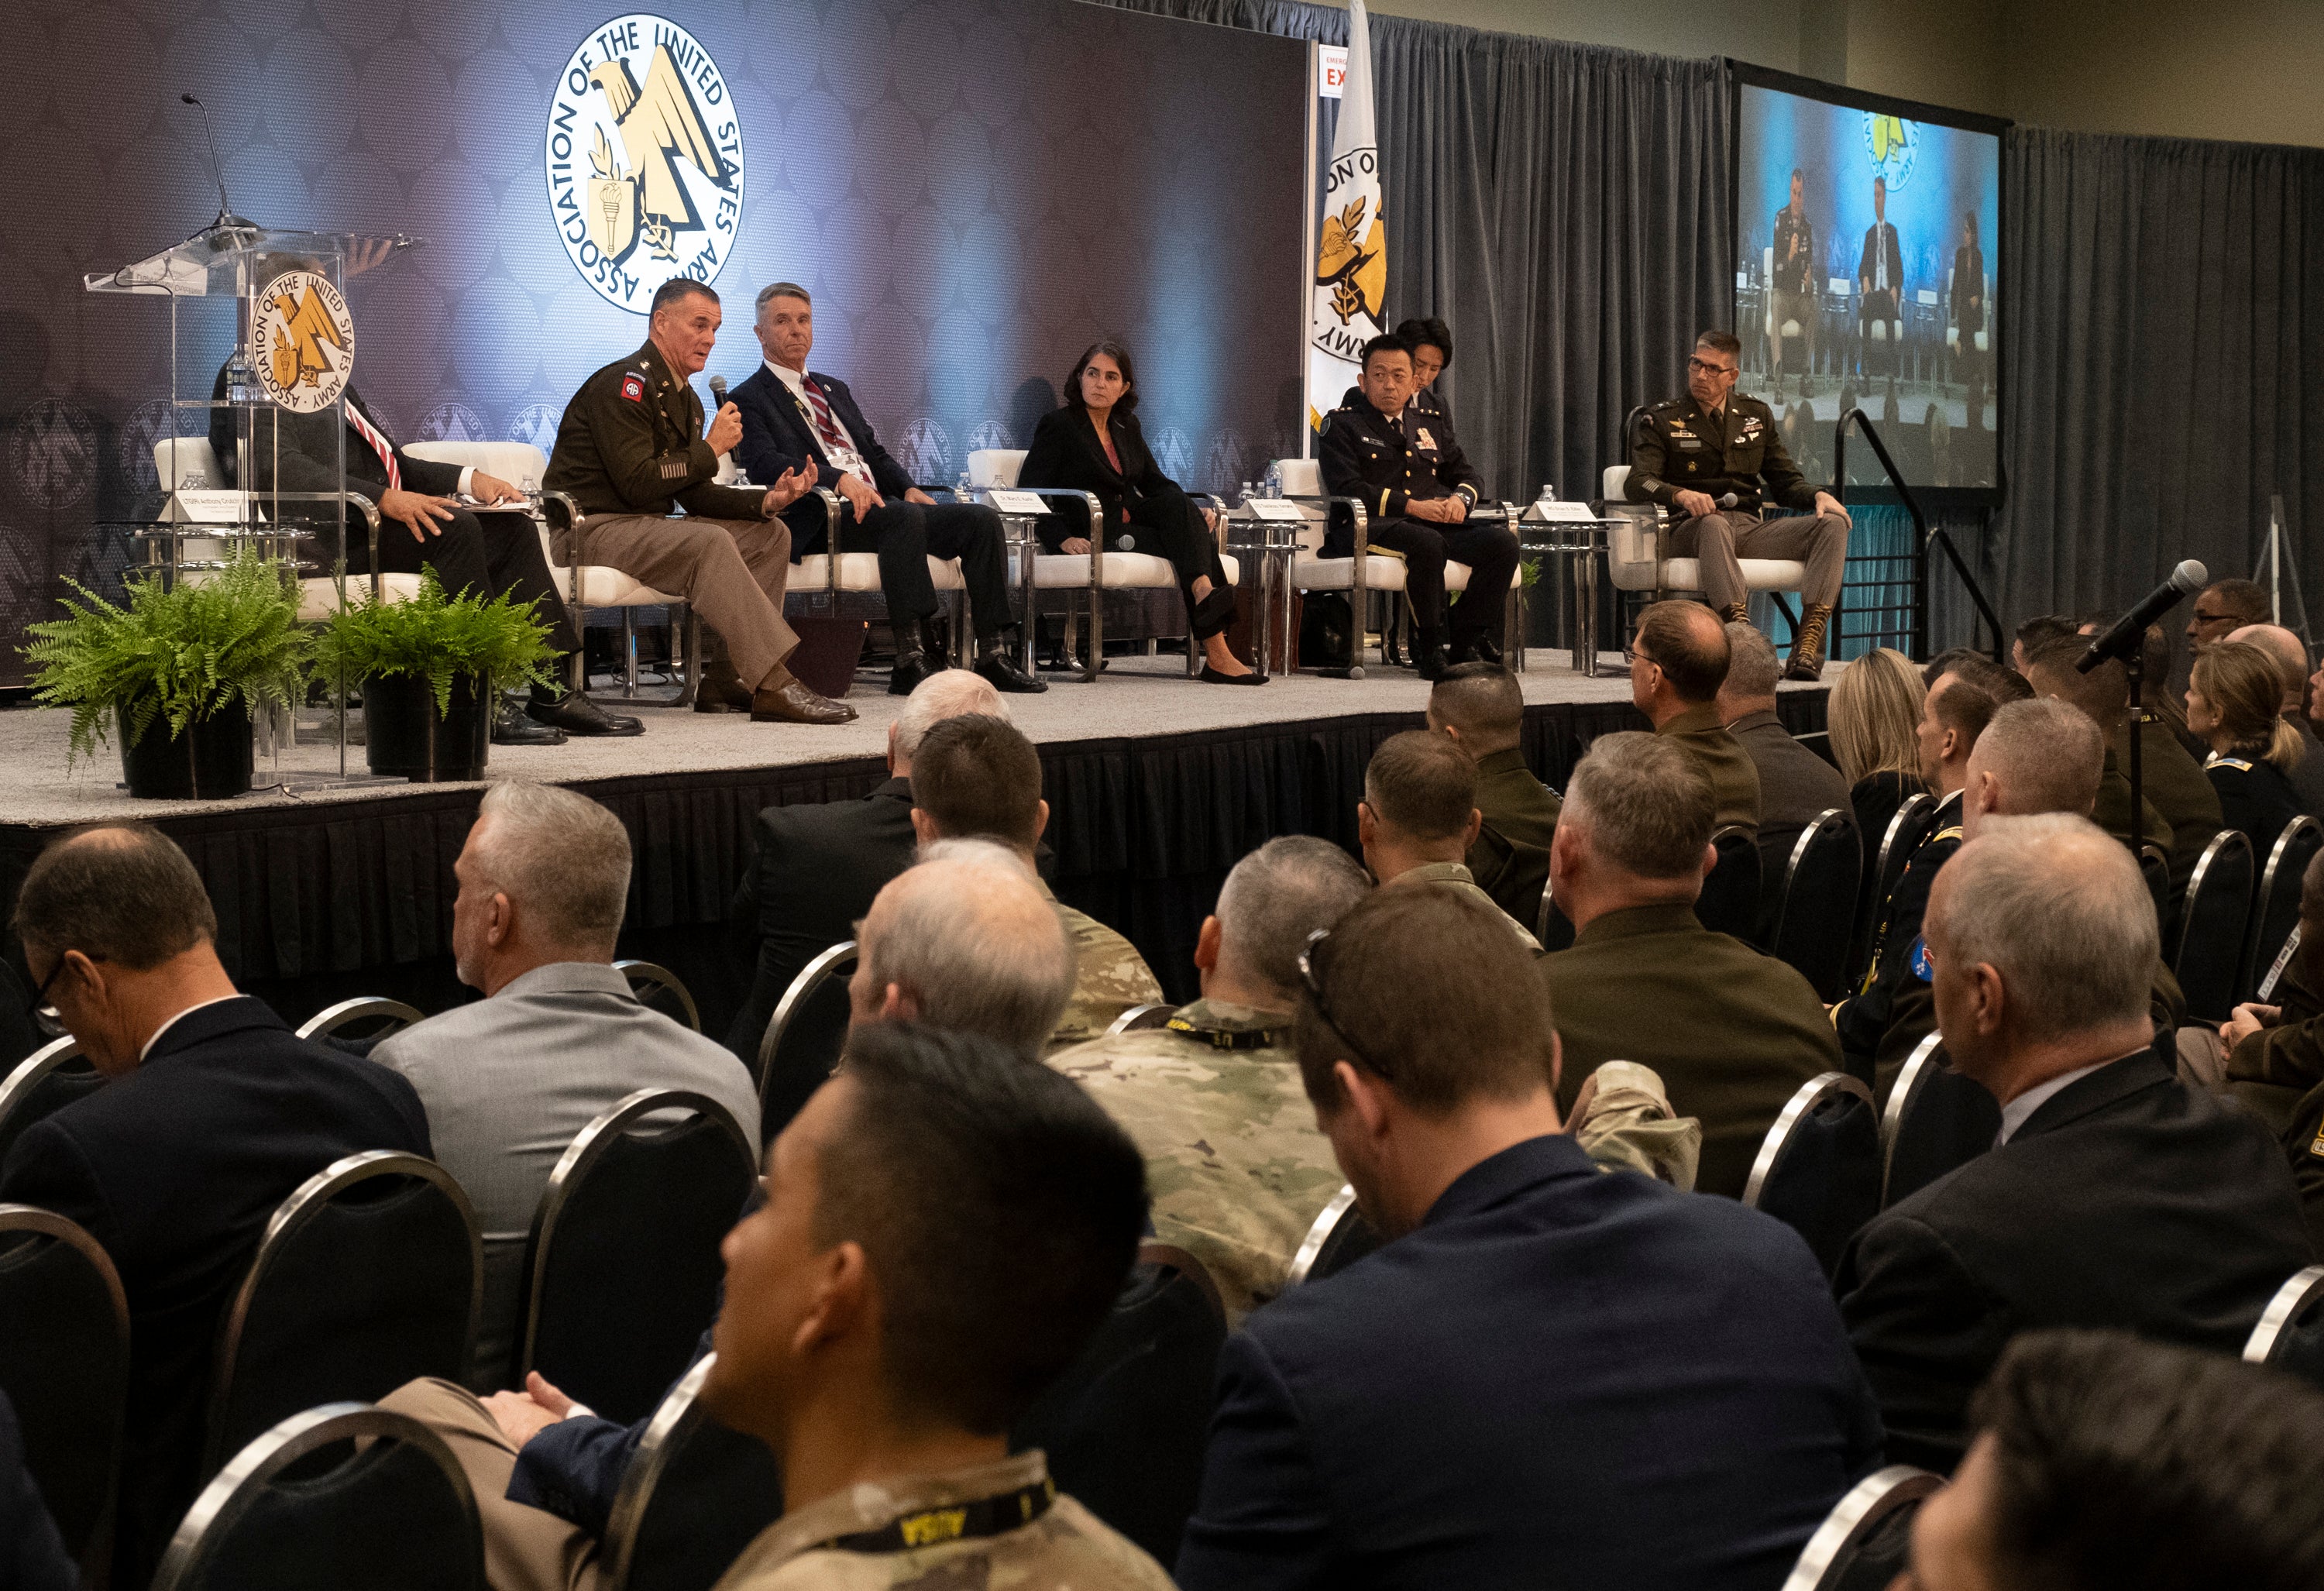 CMF - Indo-Pacific at AUSA 2022 Annual Meeting in Washington, D.C., Tuesday, Oct. 11, 2022. (T.J. Kirkpatrick for AUSA)